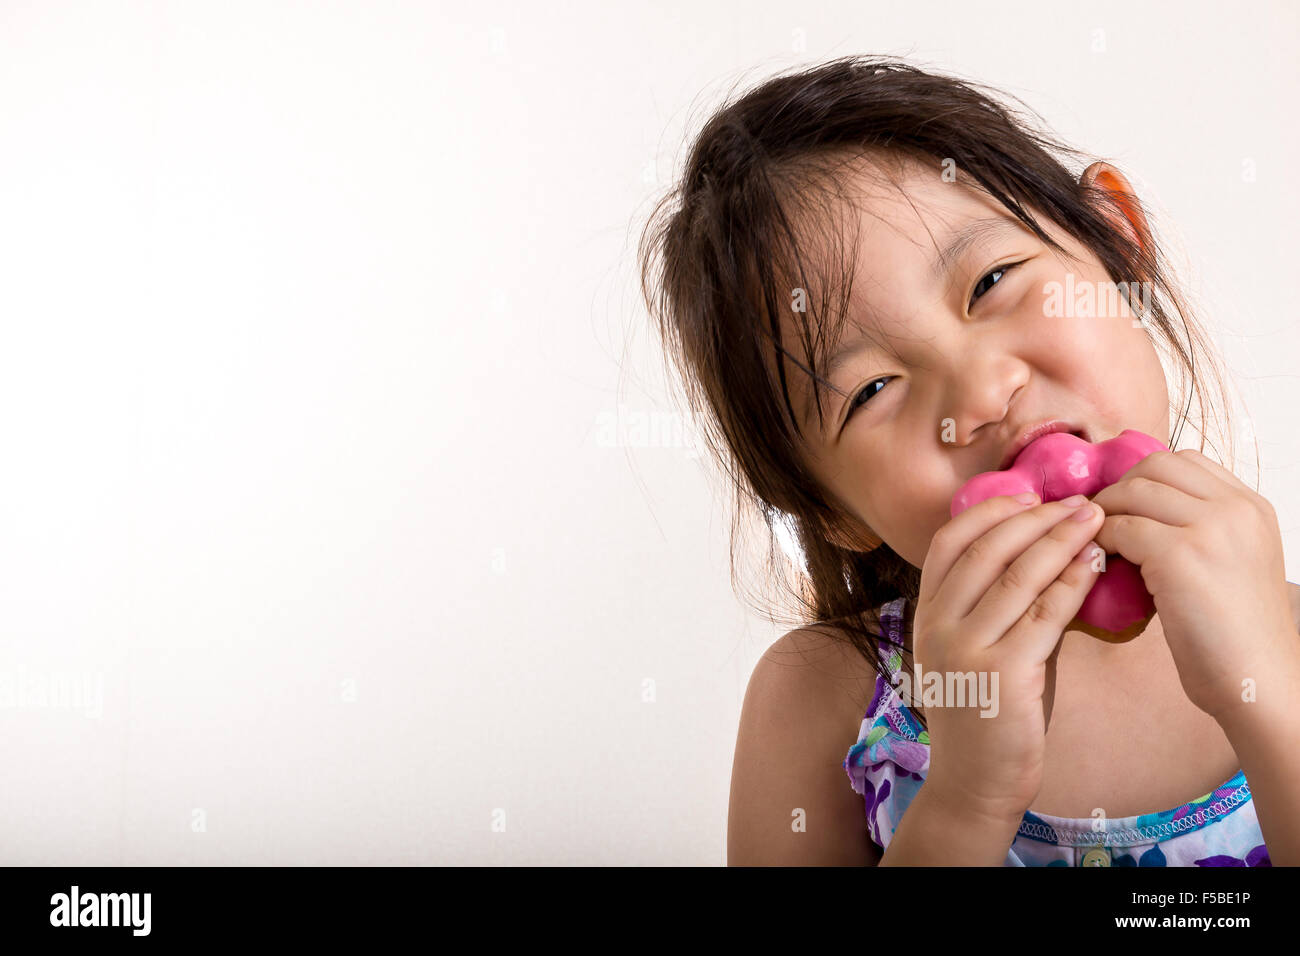 Little girl is eating her donut with happiness. Stock Photo